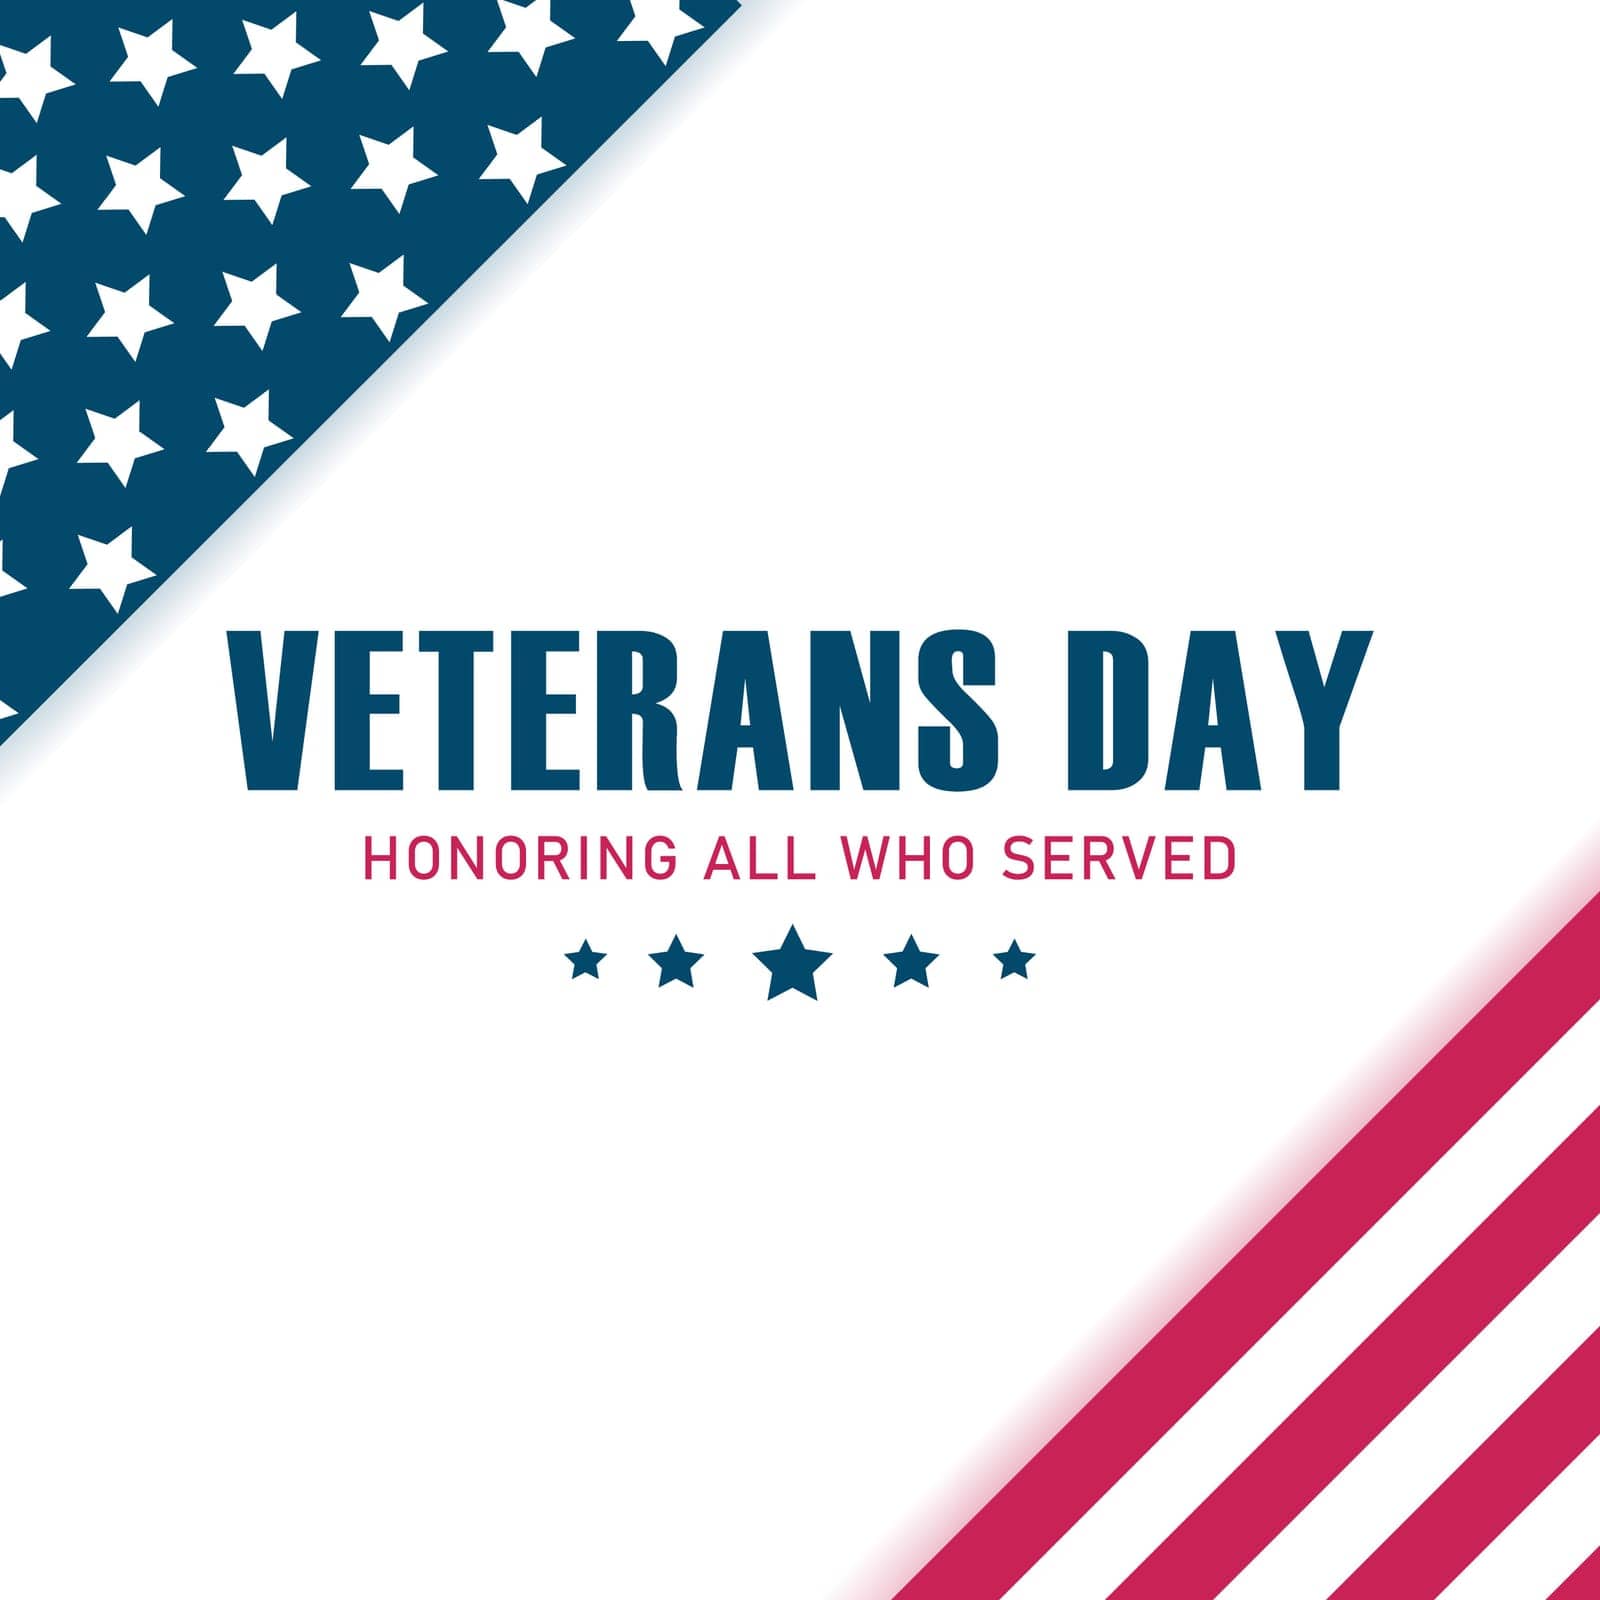 Creative vector illustration of Veterans Day. Honoring all who served.